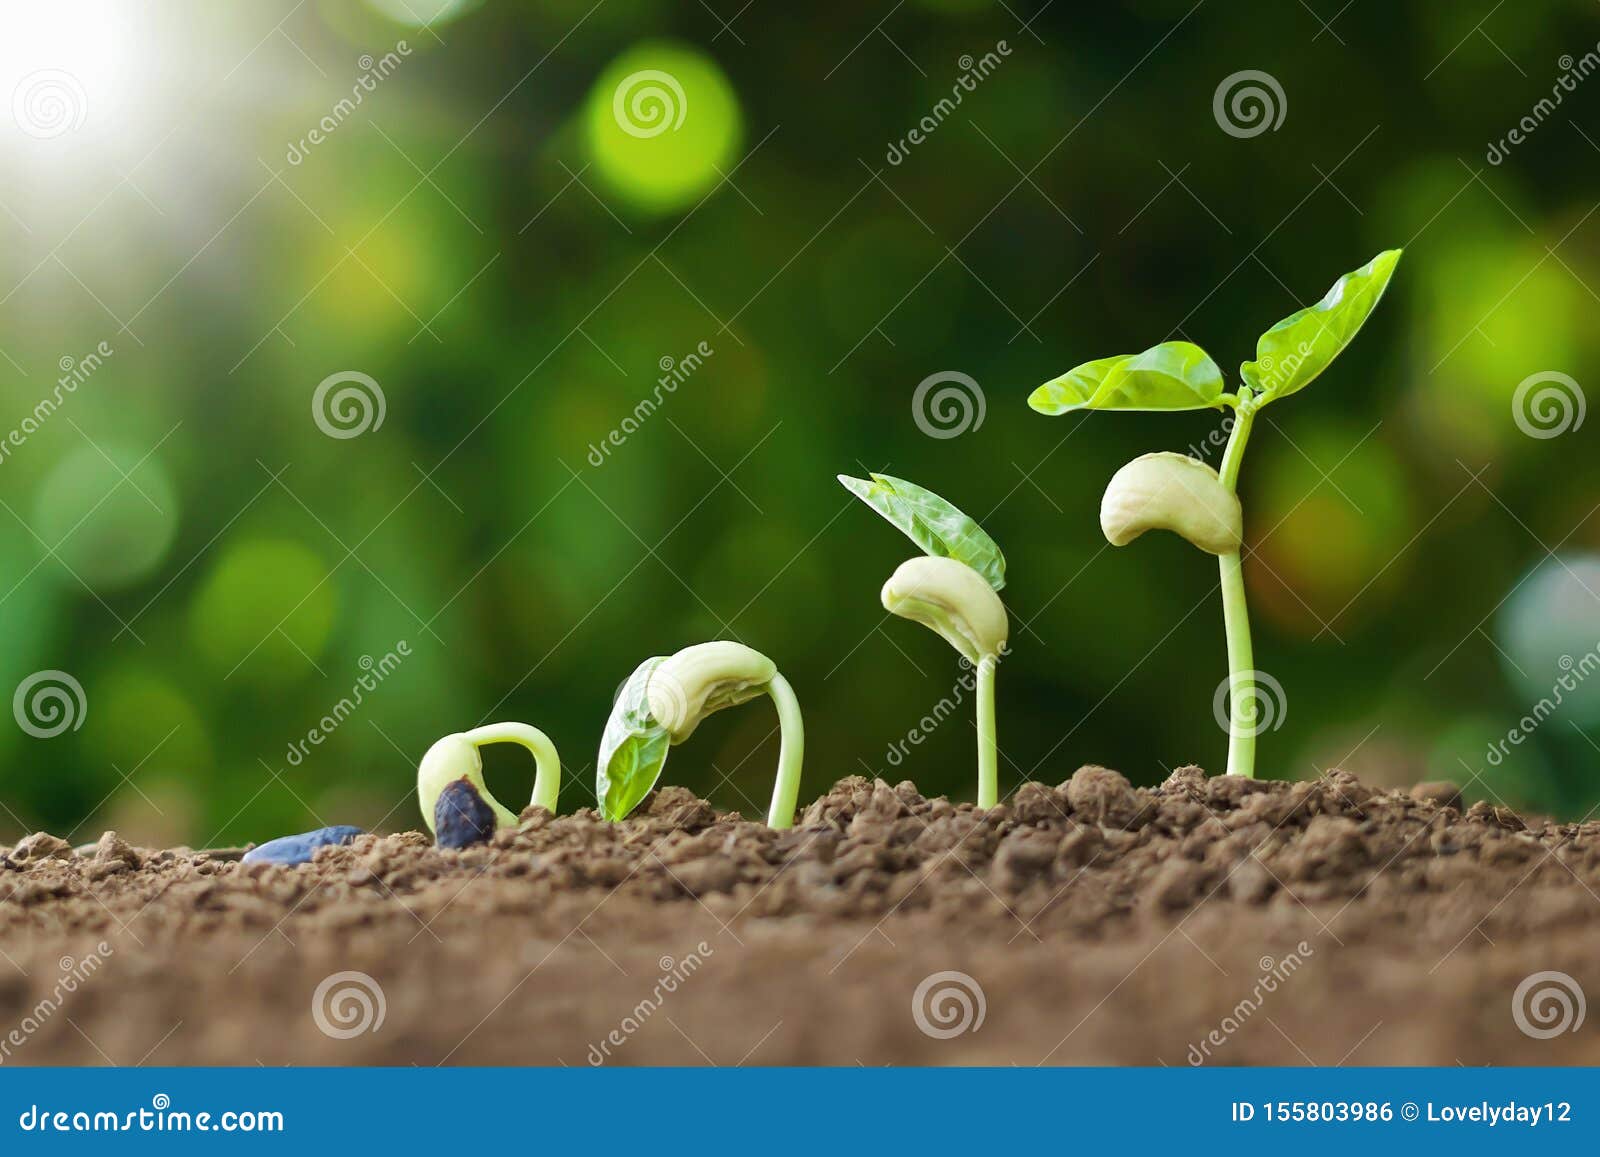 planting seed grow step concept in garden and sunlight. agriculture idea